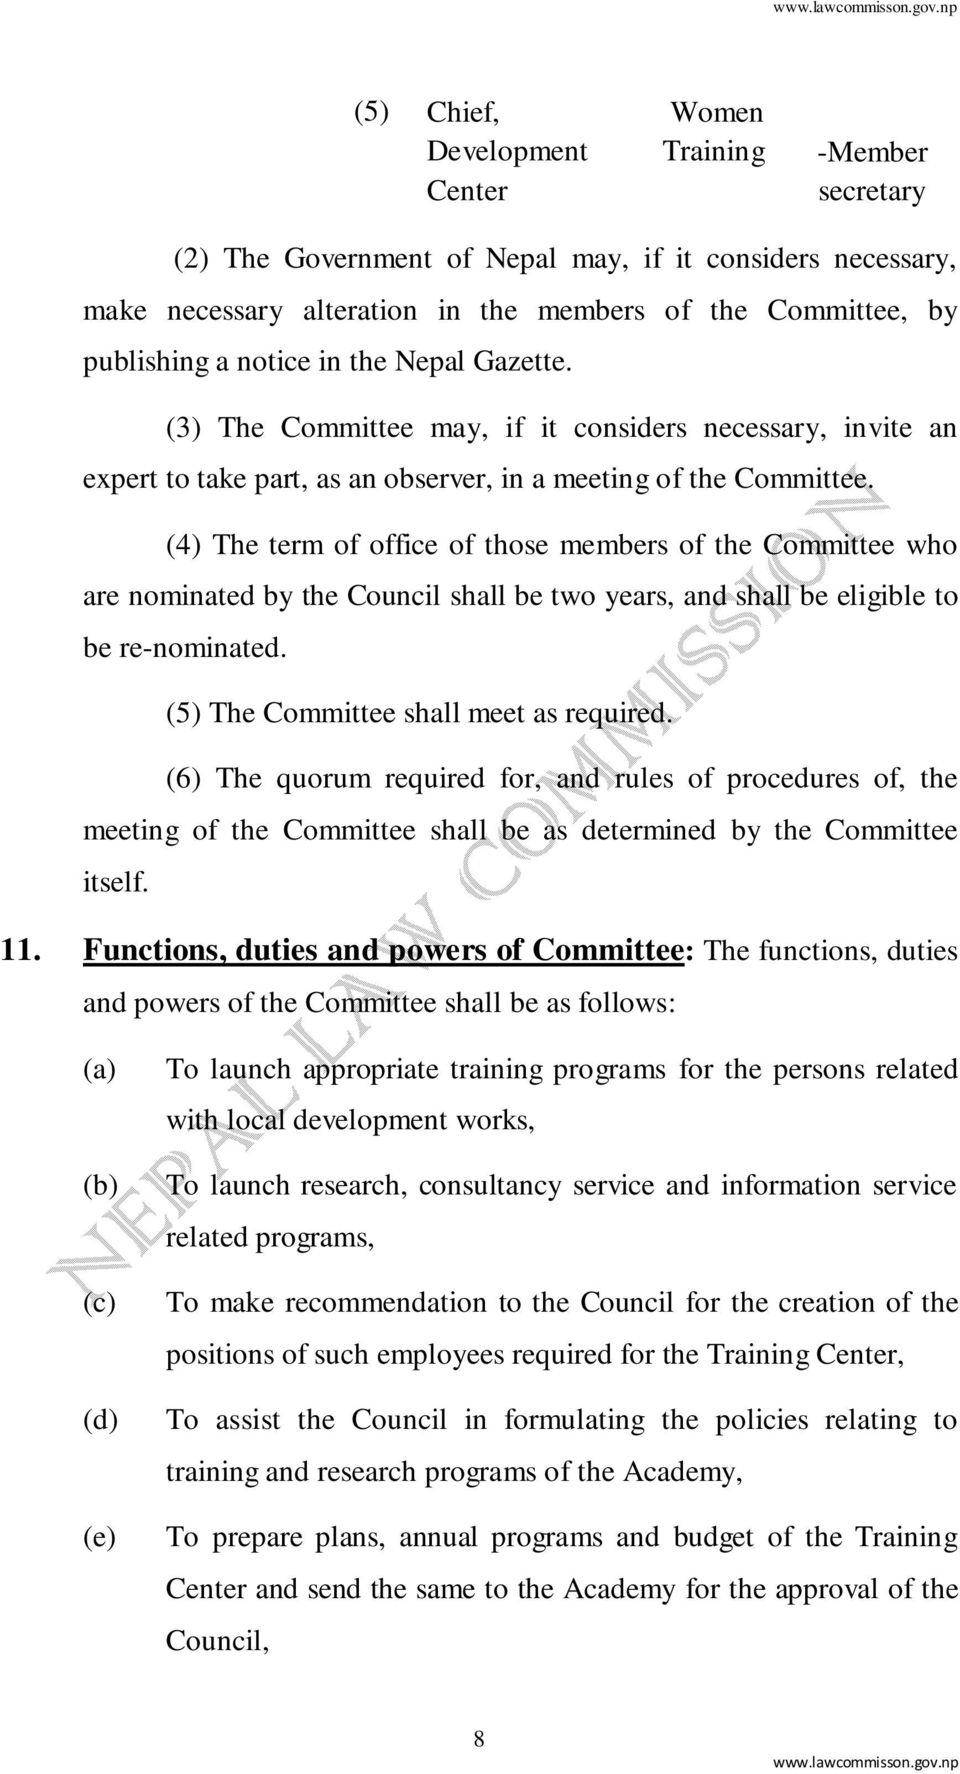 (4) The term of office of those members of the Committee who are nominated by the Council shall be two years, and shall be eligible to be re-nominated. (5) The Committee shall meet as required.